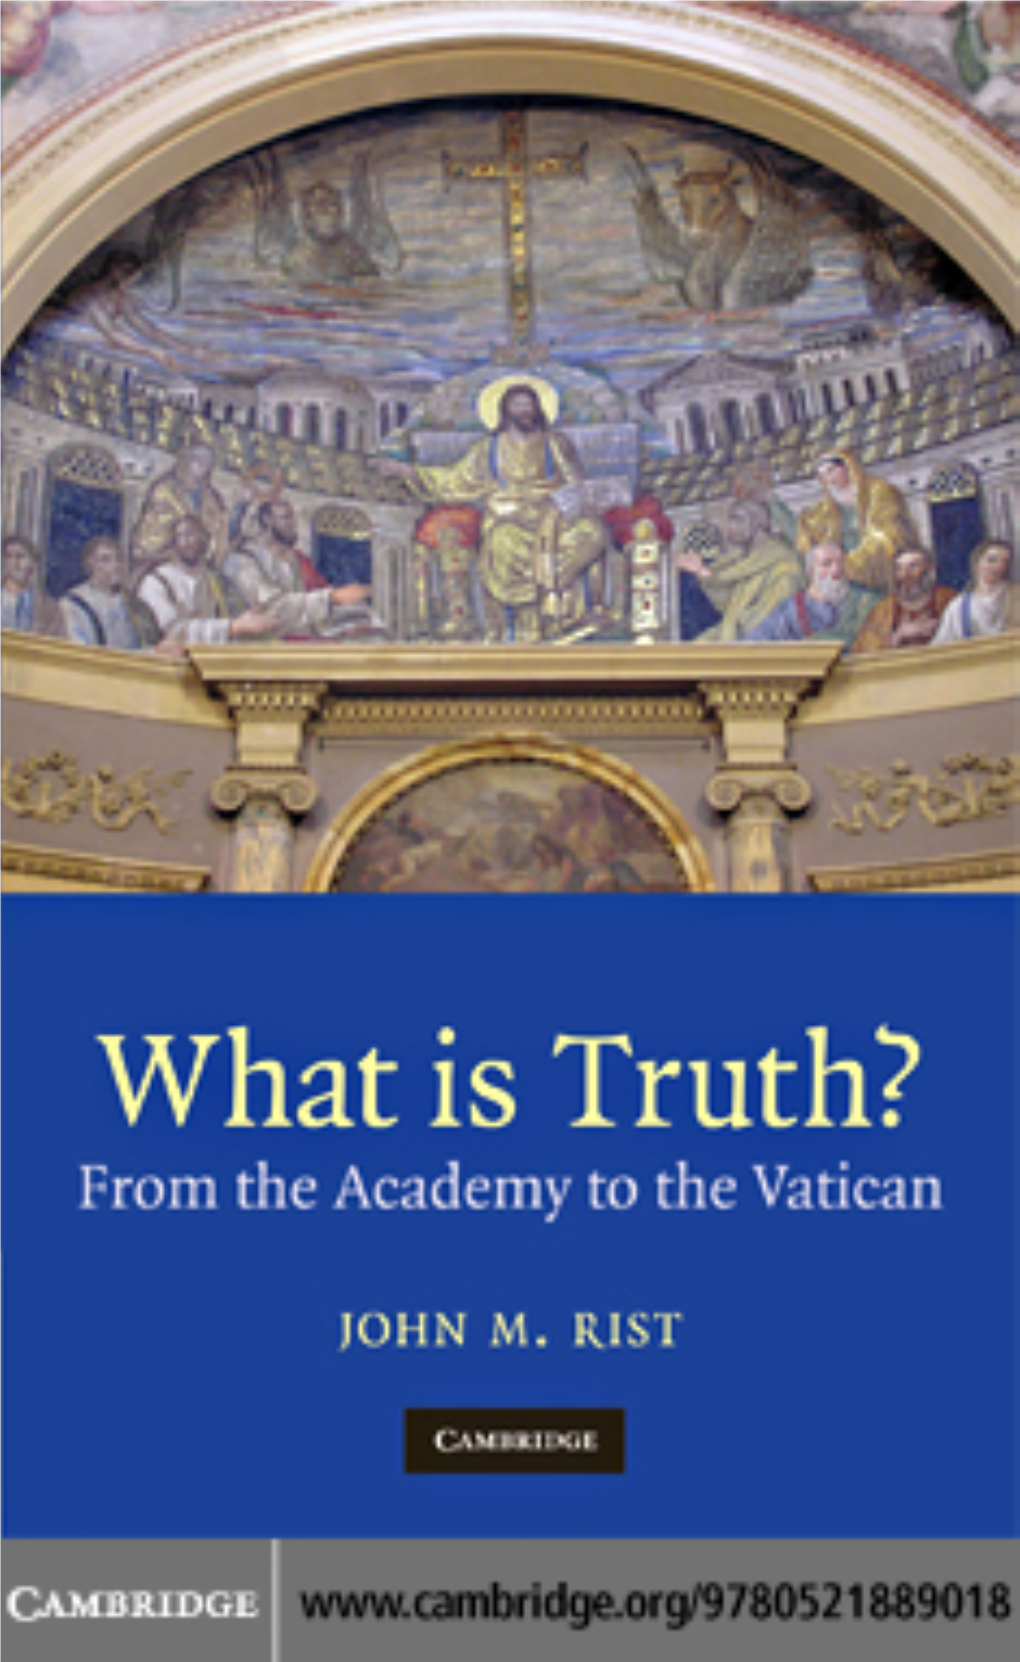 WHAT IS TRUTH?: from the Academy to the Vatican